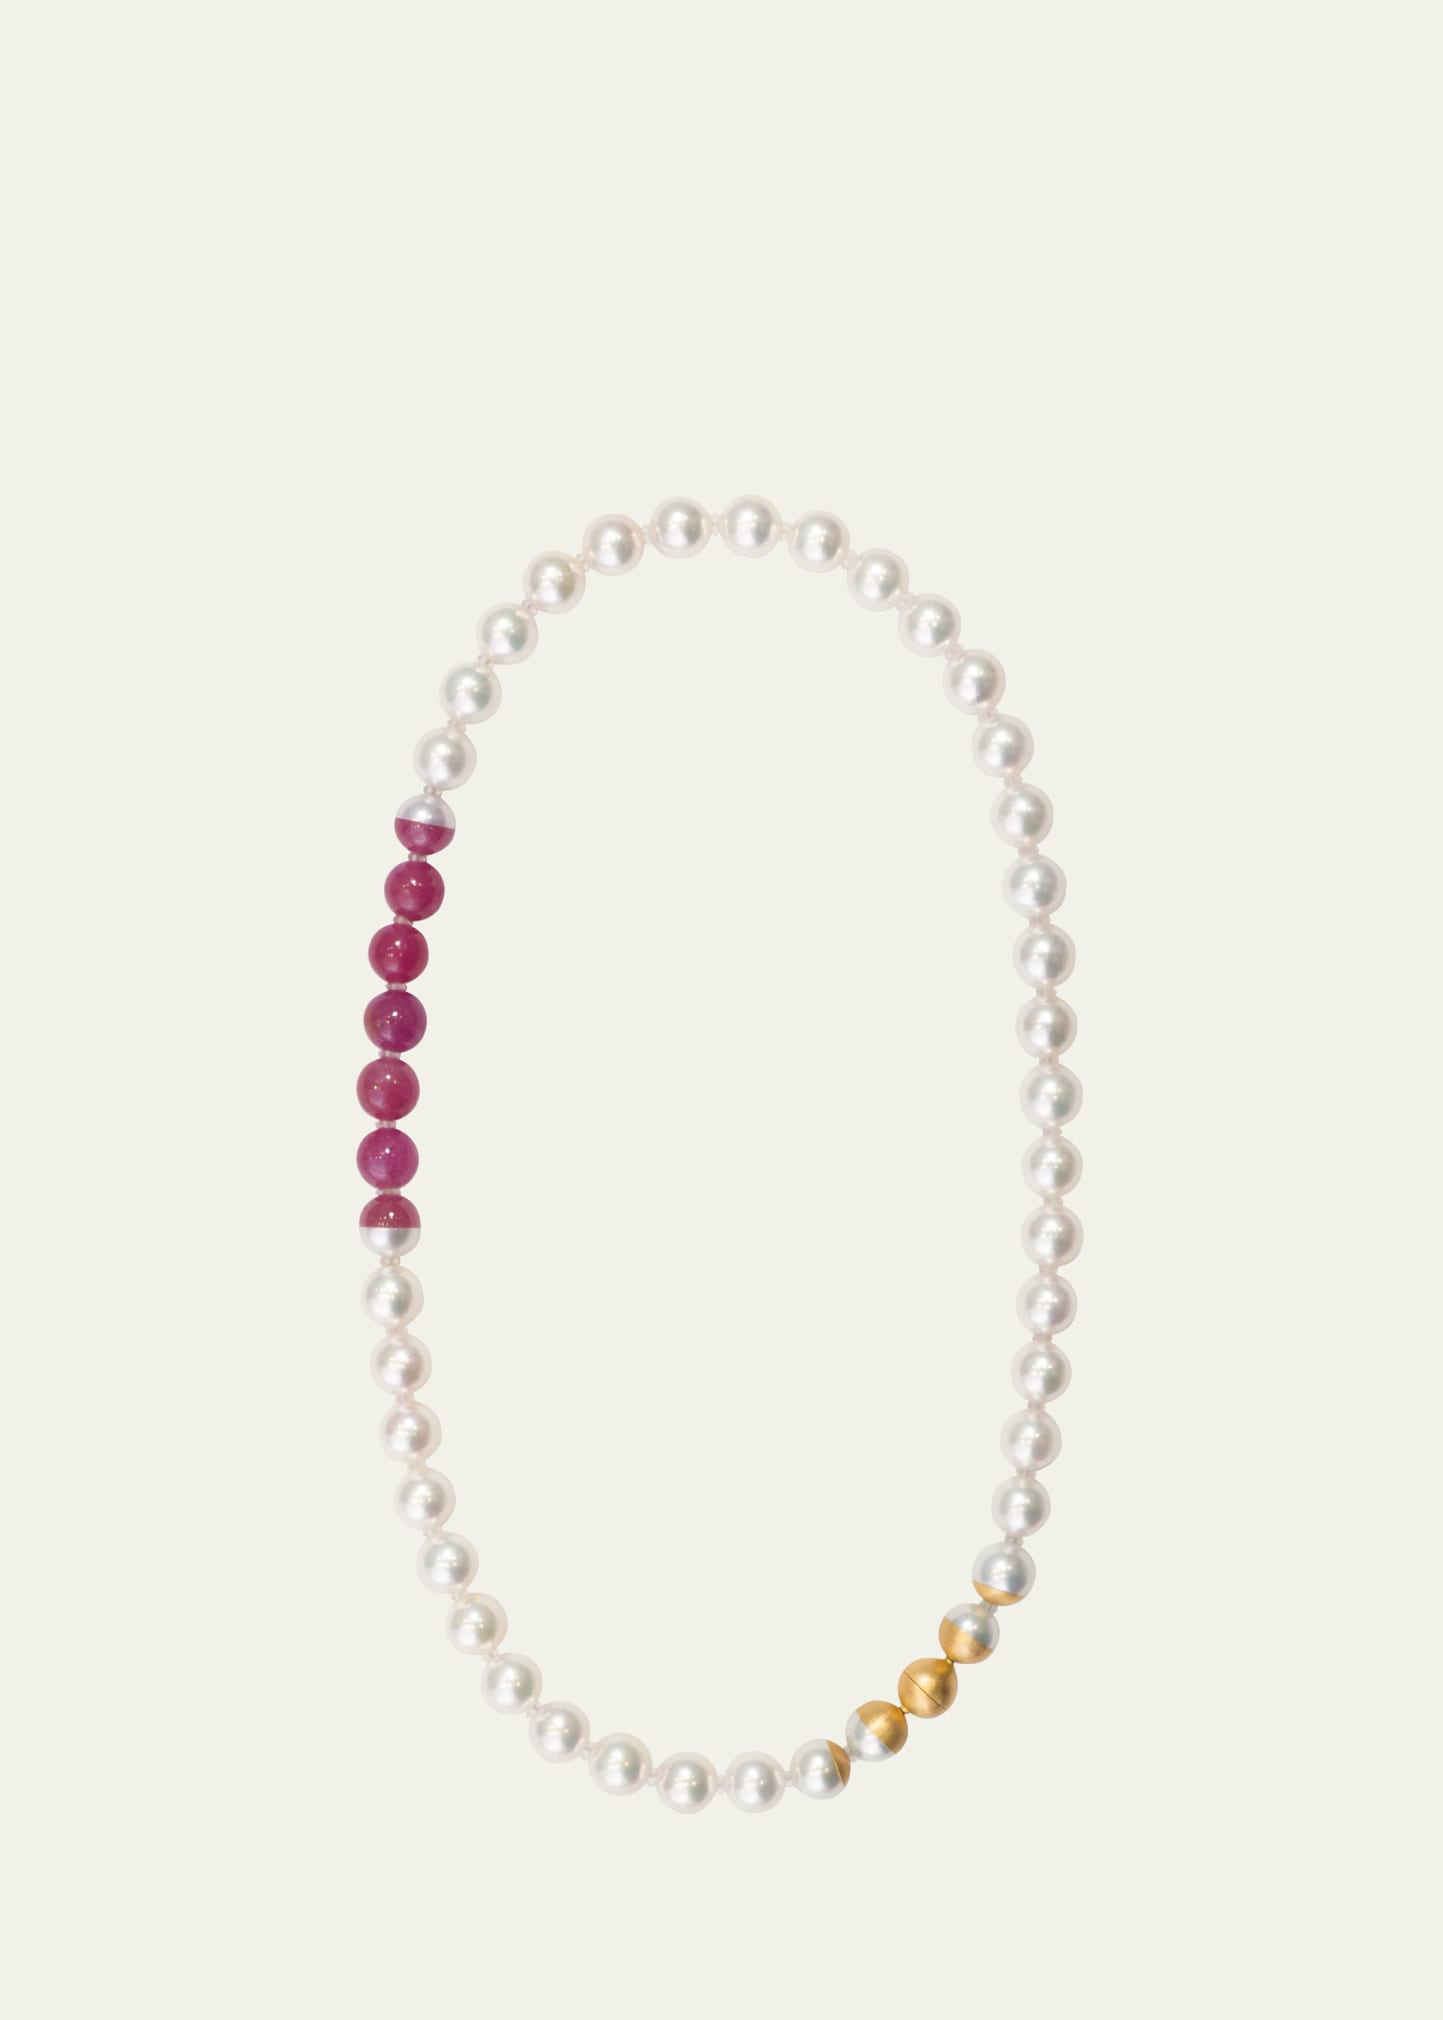 Yutai 18k Yellow Gold Sectional Pearl Necklace With Cultured Akoya Pearls And Pink Sapphires